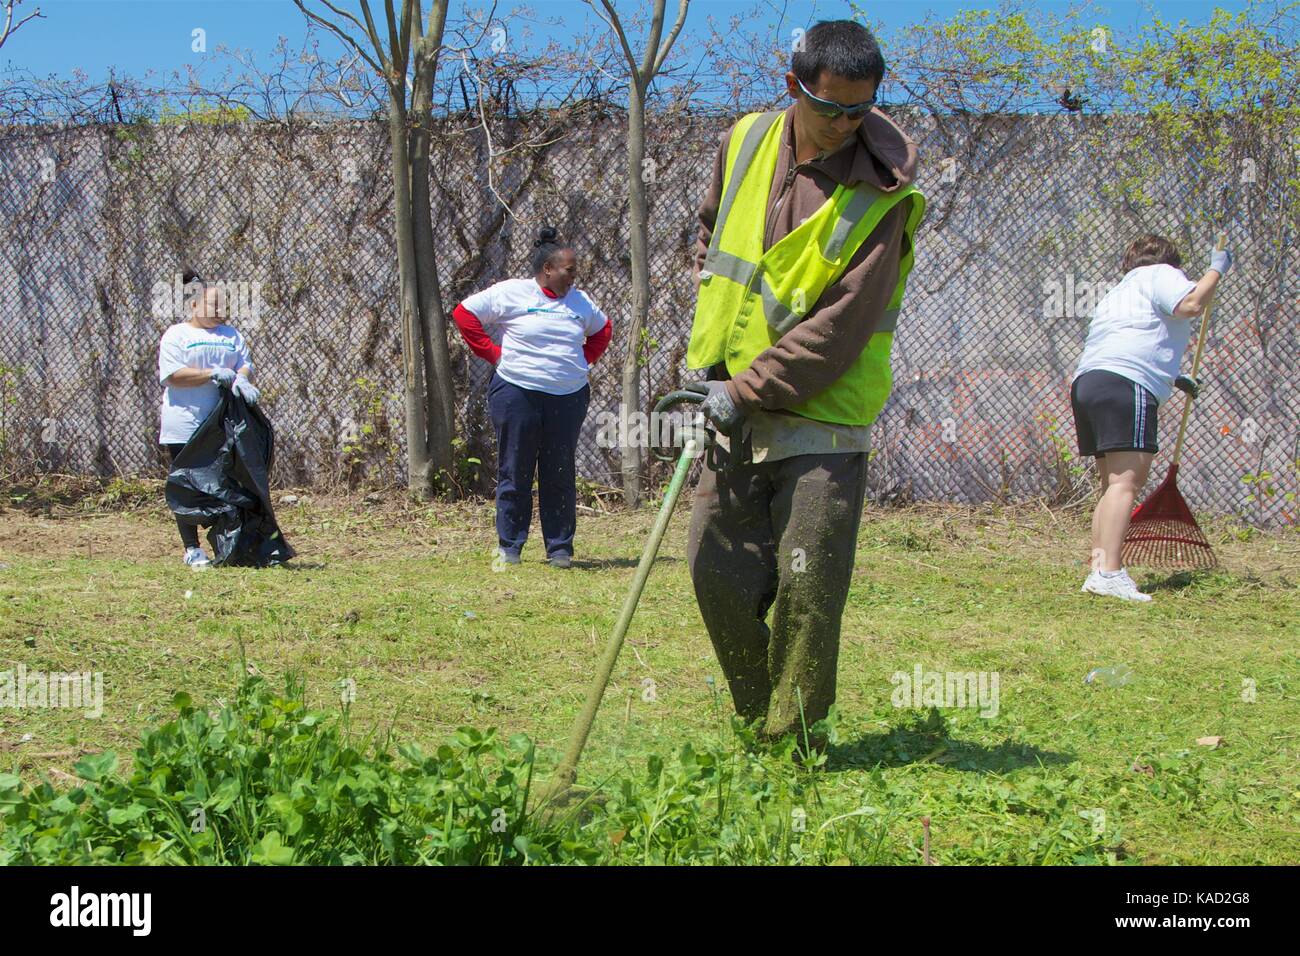 April 26, 2013 - Philadelphia, PA, USA: Volunteers clear weeds, trash and debris from a vacant lot in Philadelphia, Pennsylvania. Stock Photo